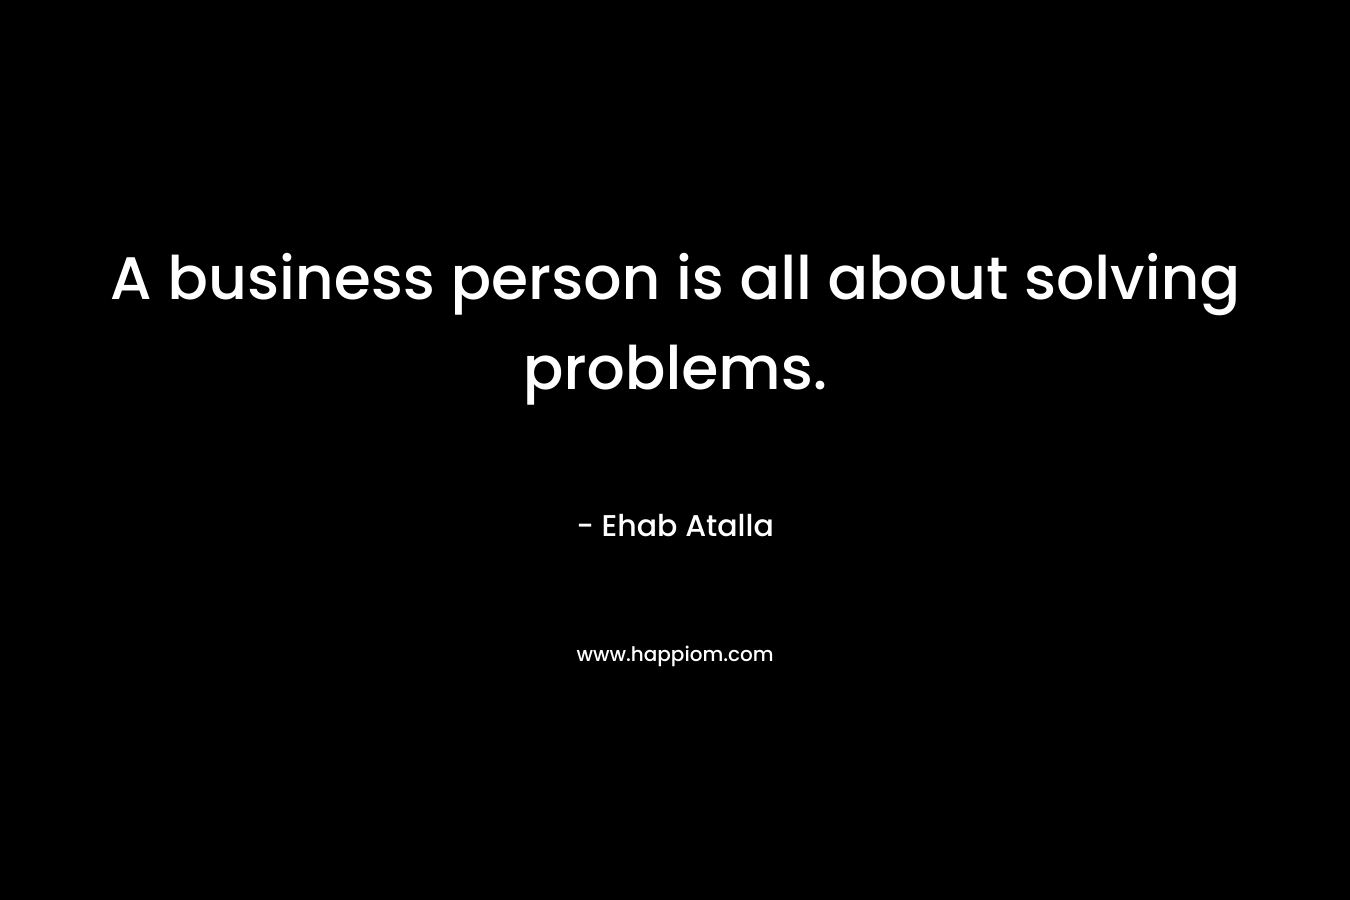 A business person is all about solving problems.